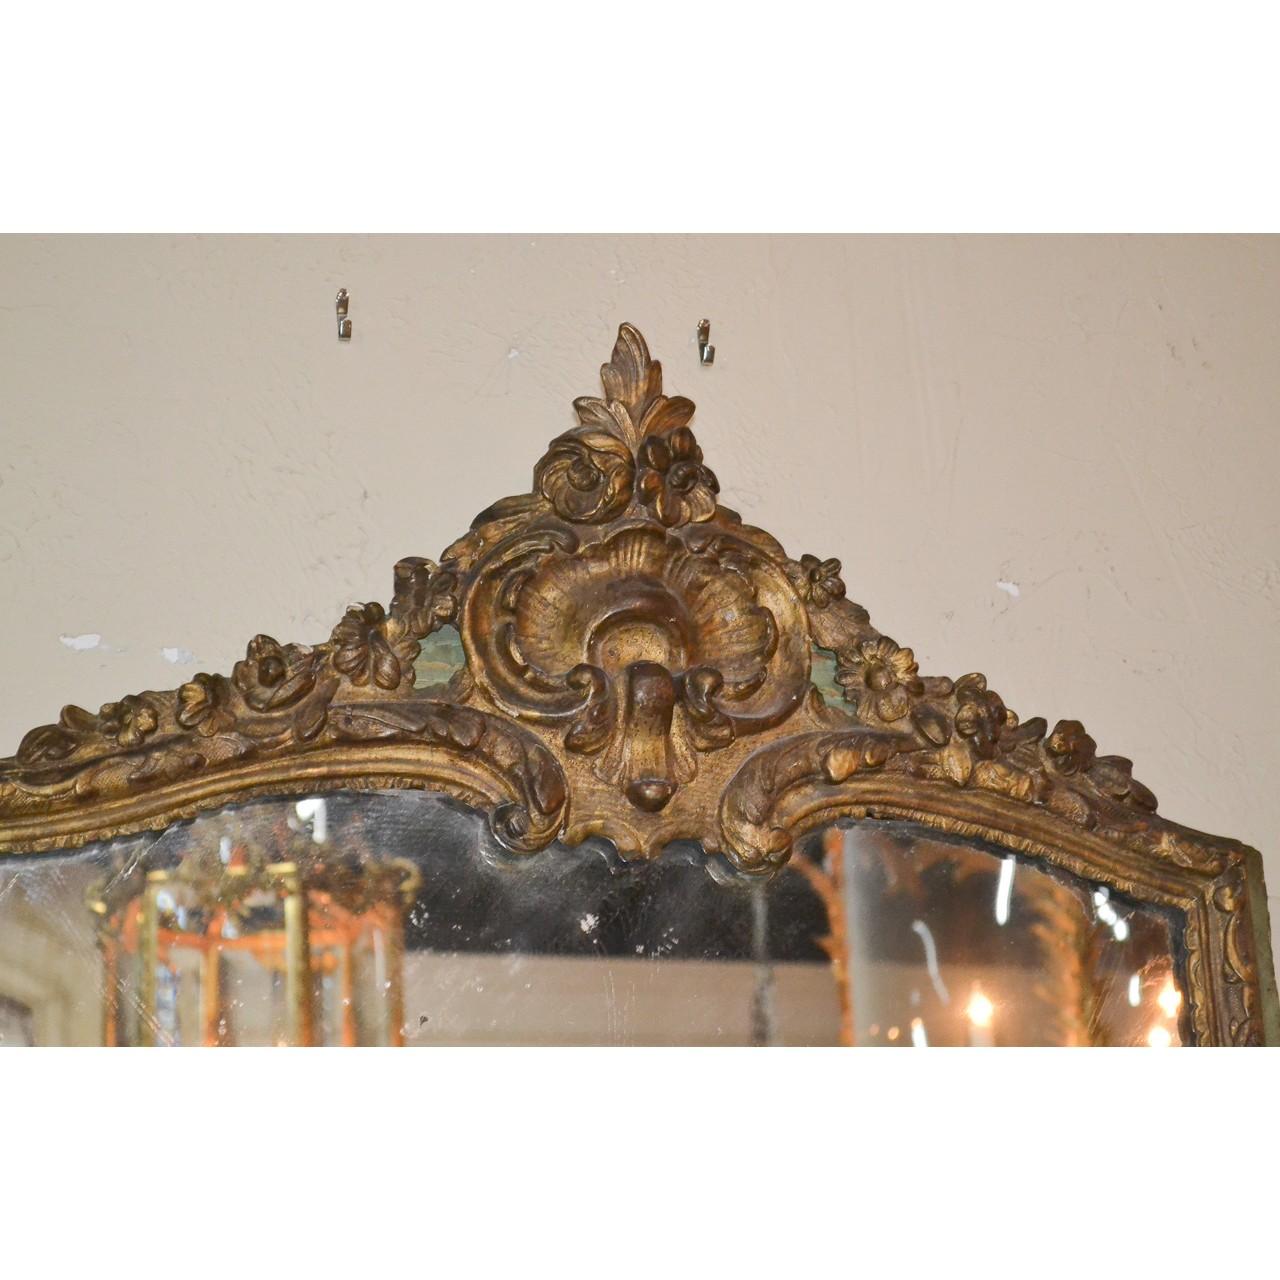 Splendid 18th century French Regence style parcel gilt wall or console mirror. The crest with finely carved leaf-sprays, shells, blossoms, and trailing flower vines. The inner border carved in relief and trimmed with a painted green-tint outer